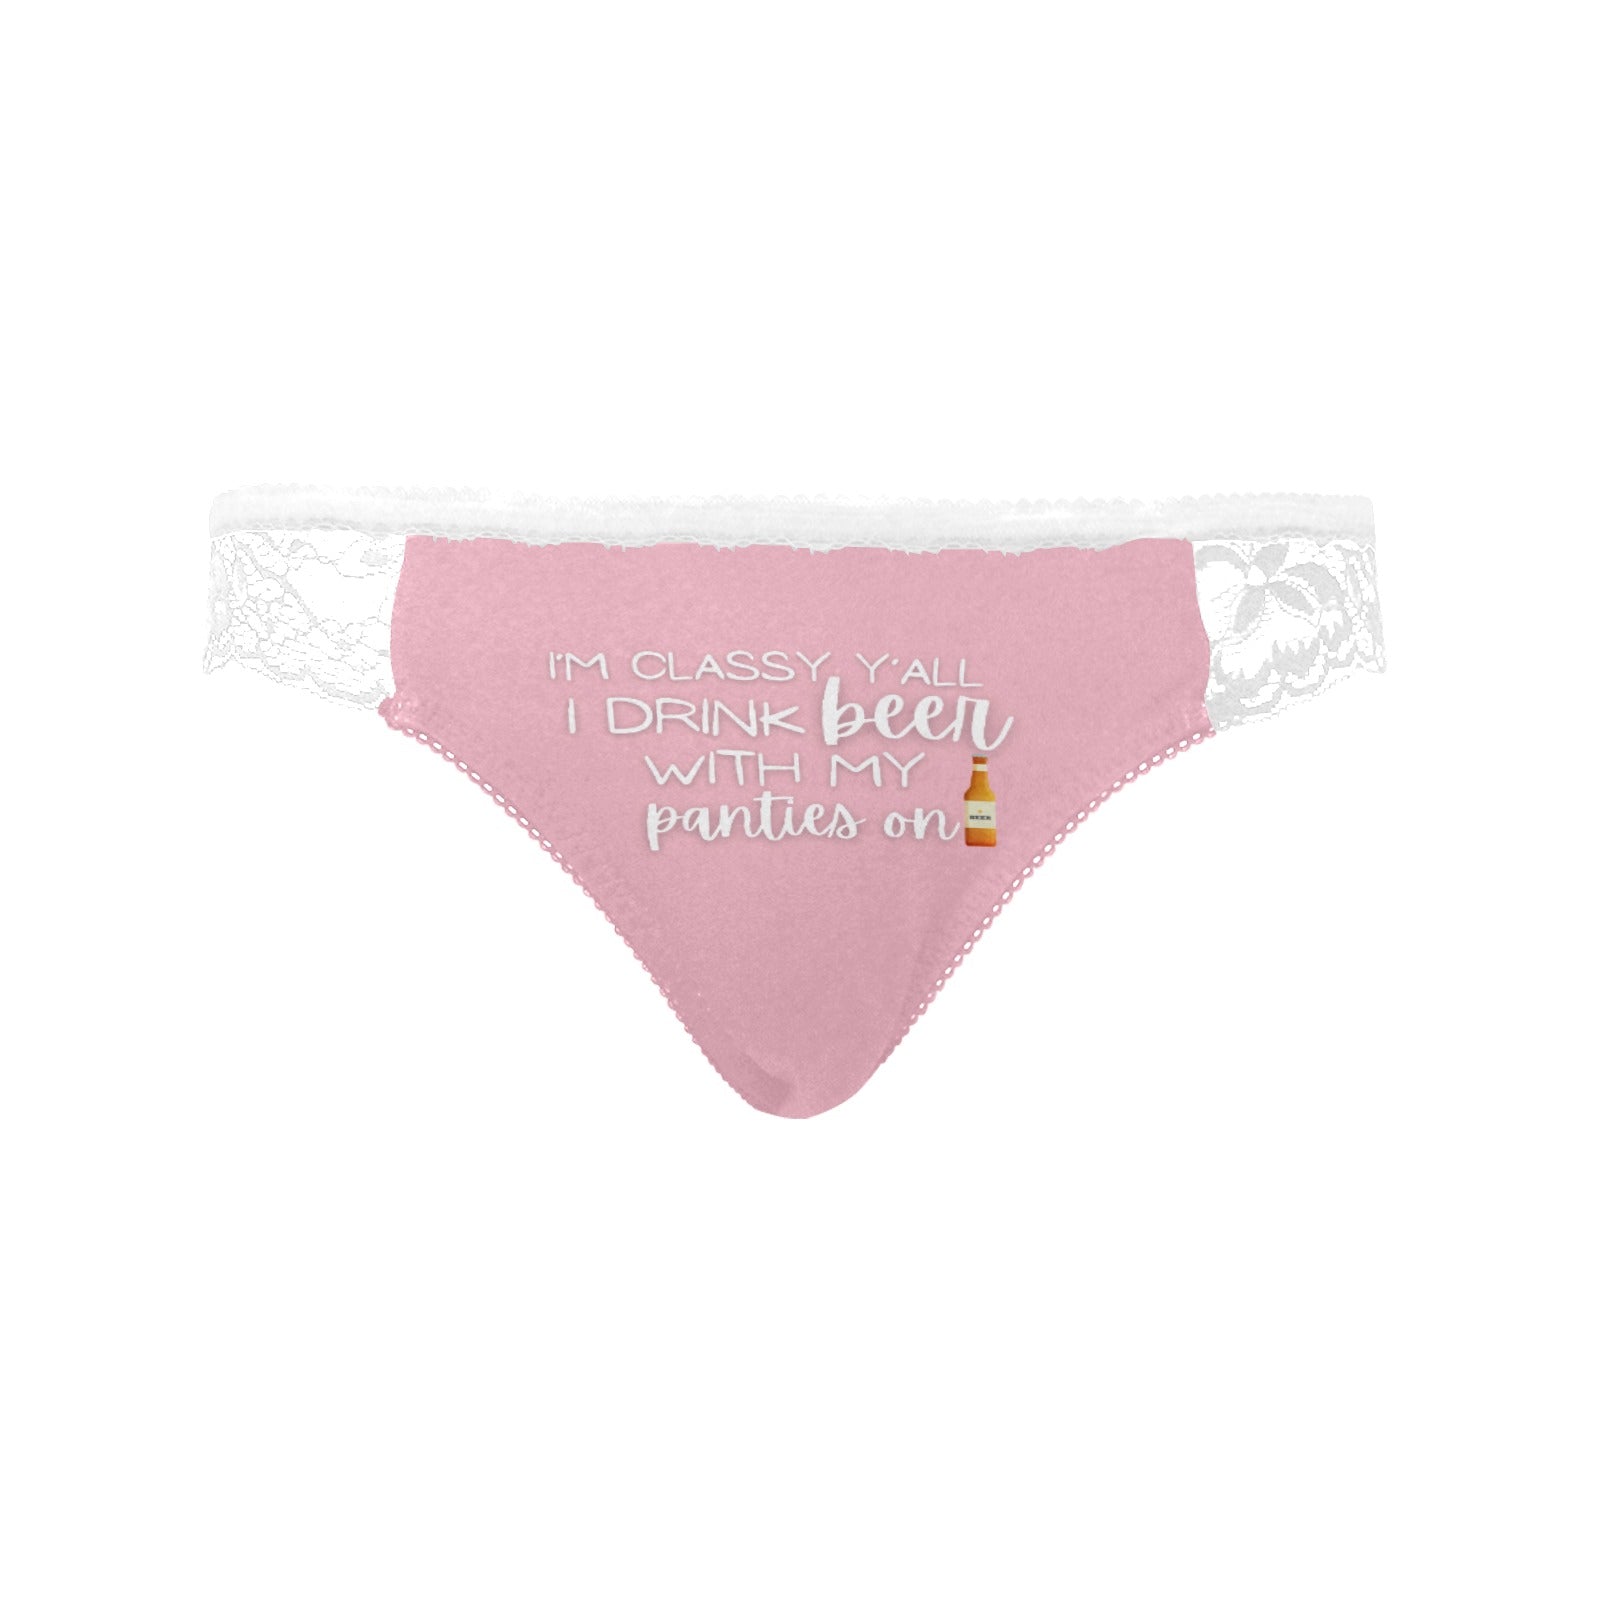 Drink Beer with Panties On - Pink White Lace / XS